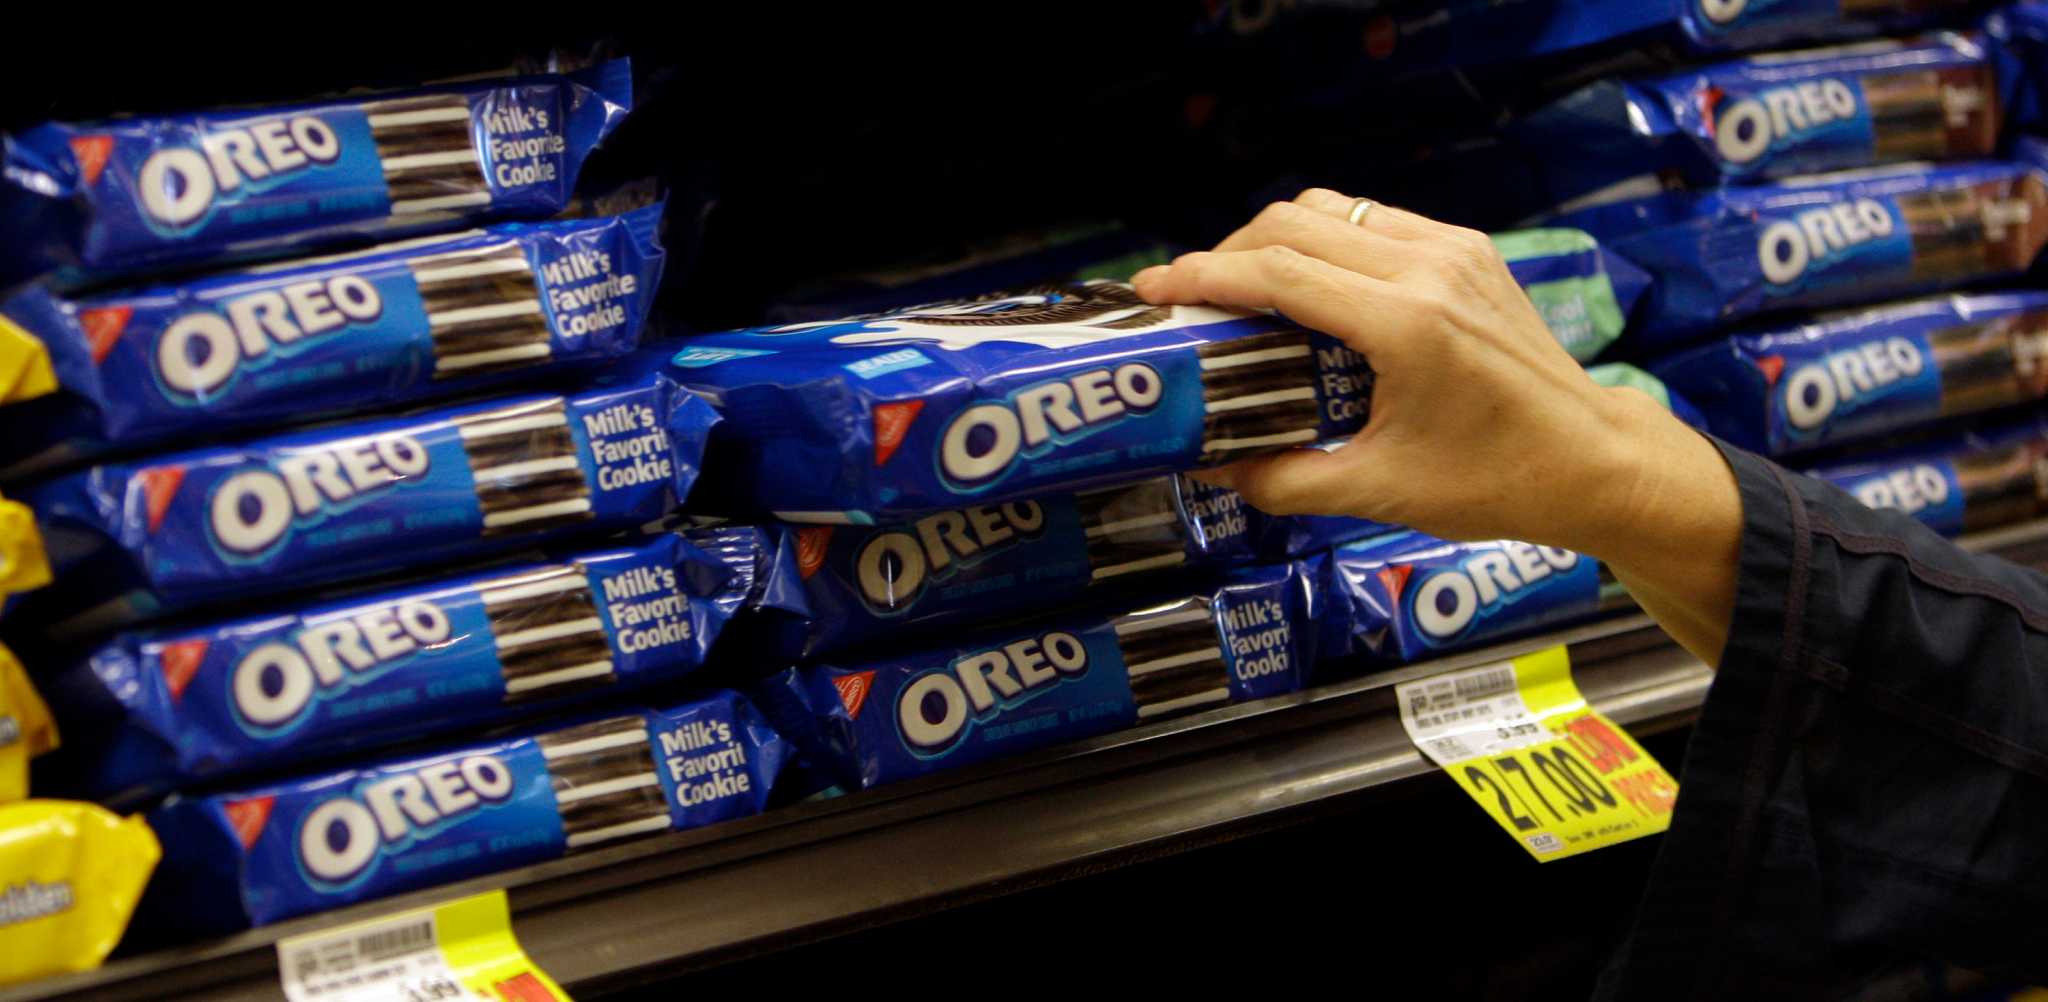 Oreo/Milka chocolate bars crucial to snack maker's US expansion